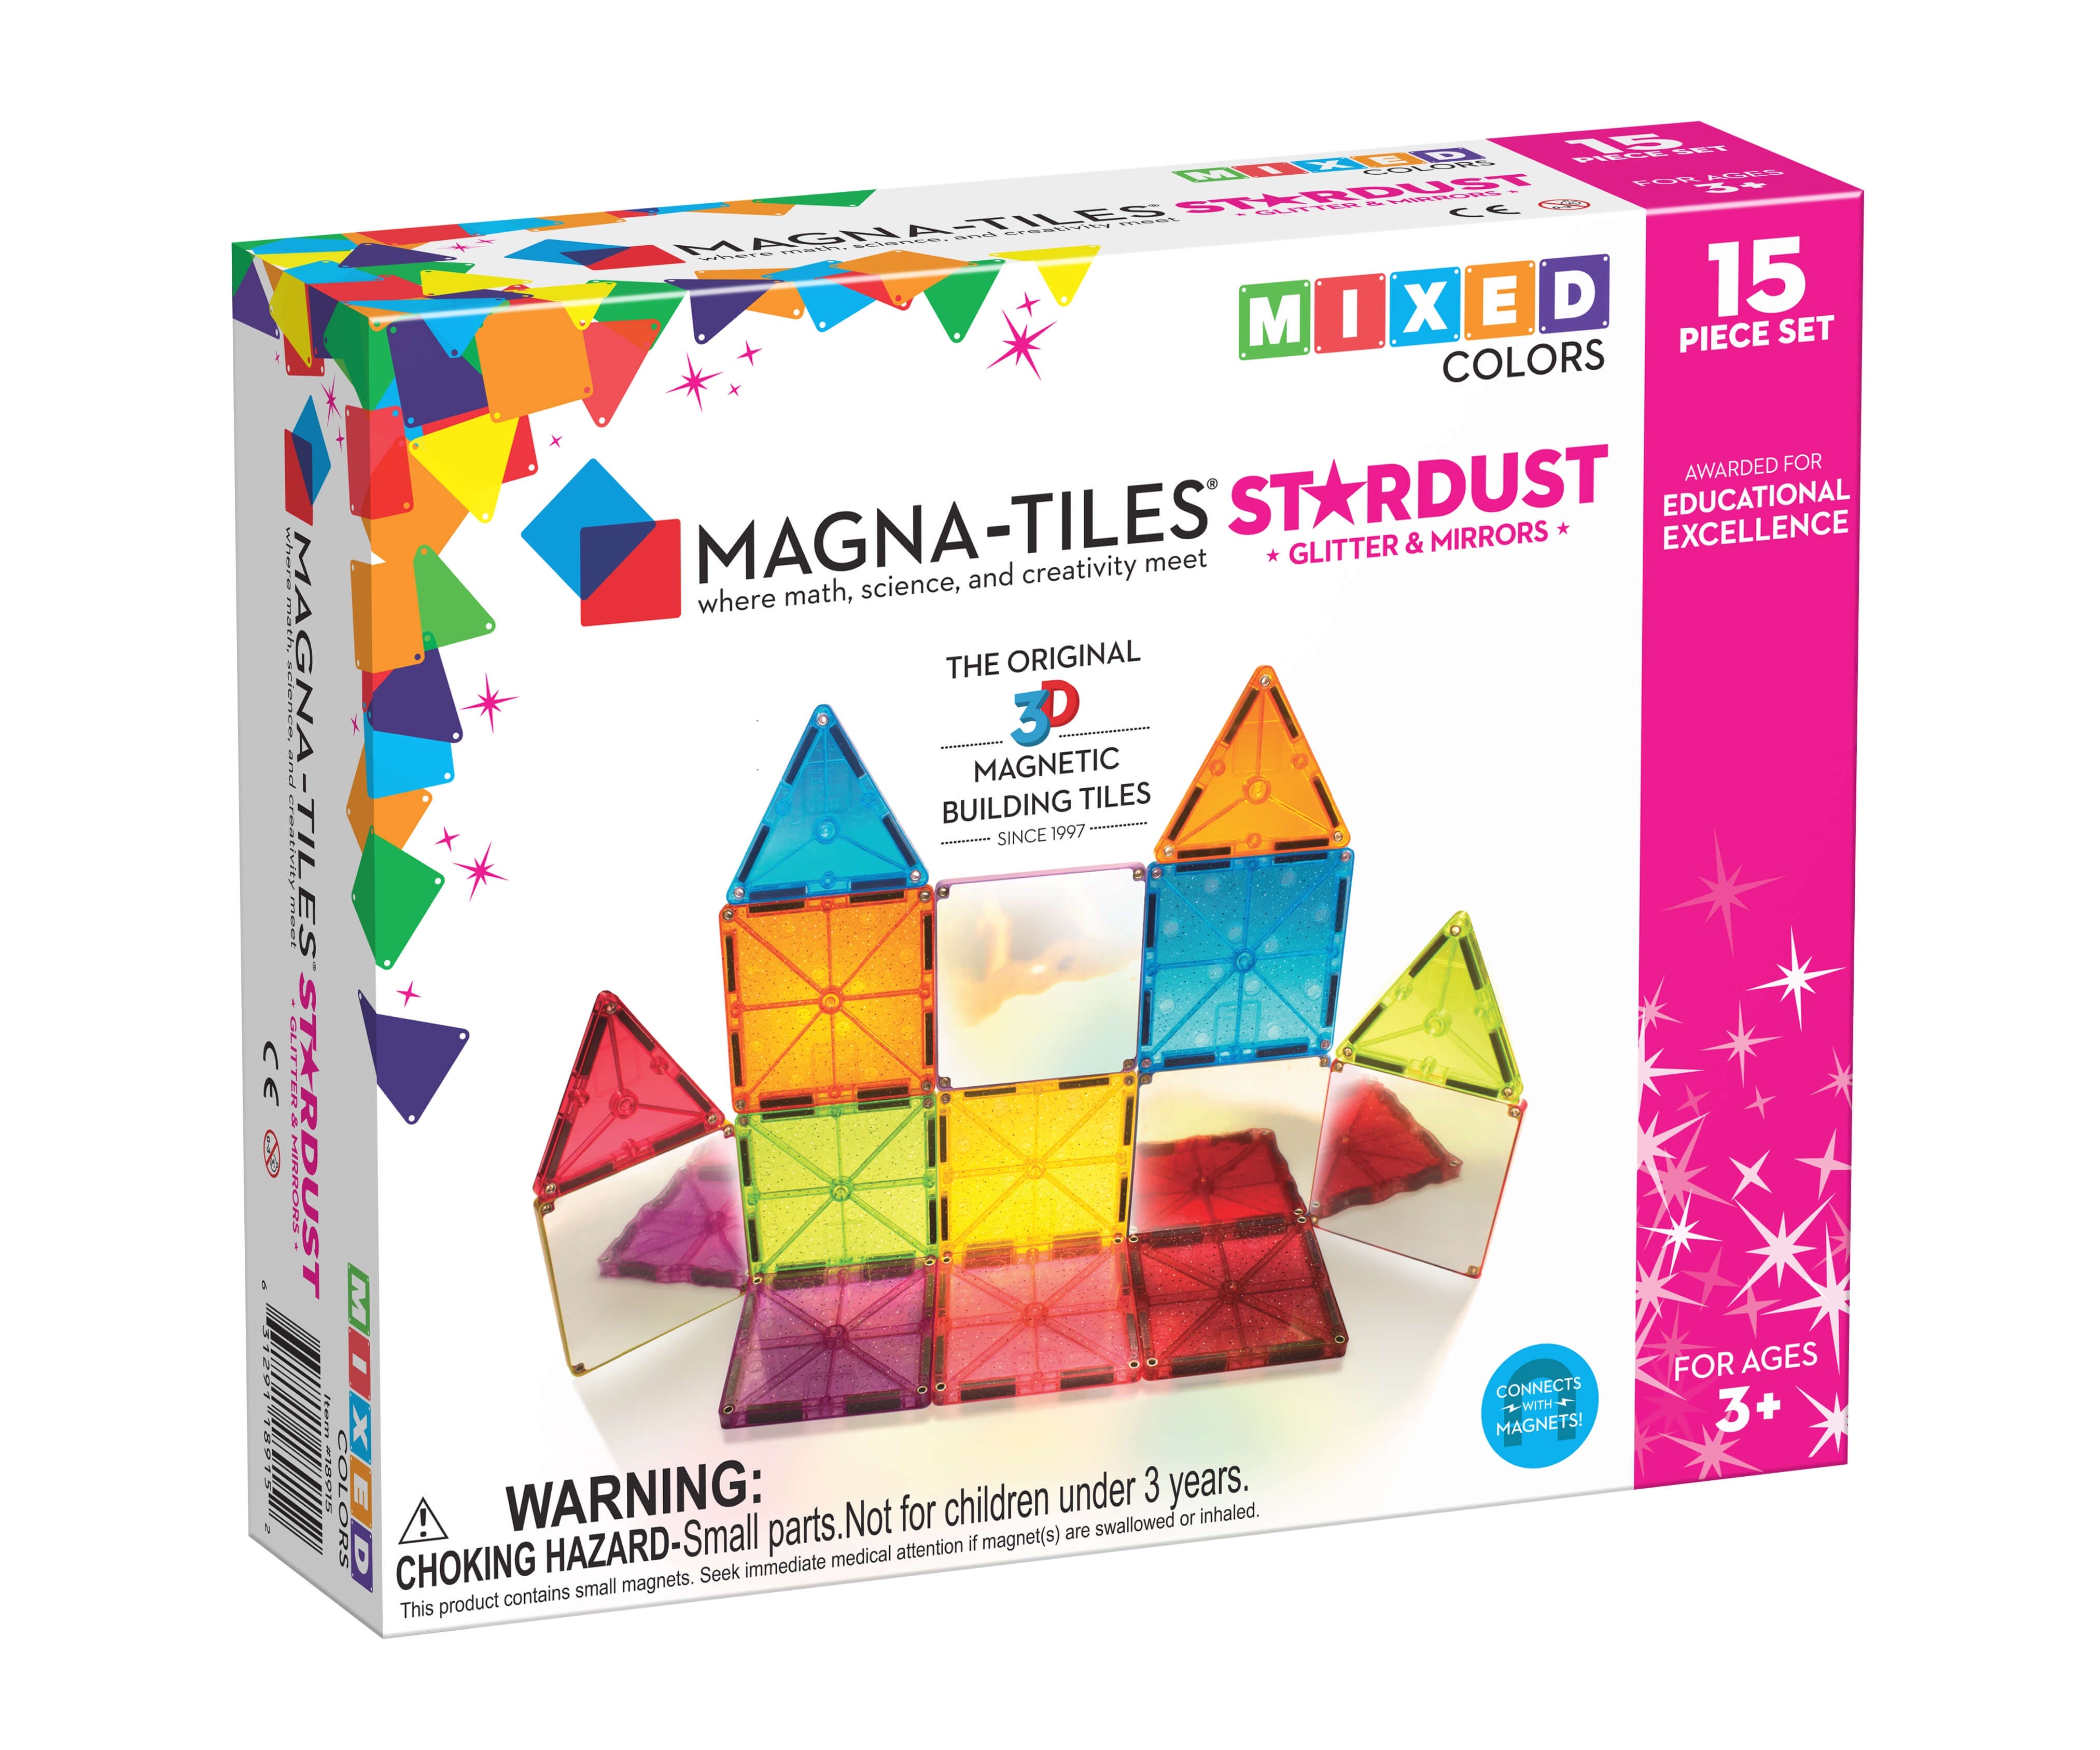 Comparing Brands of Magnetic Tiles – Little Toy Tribe